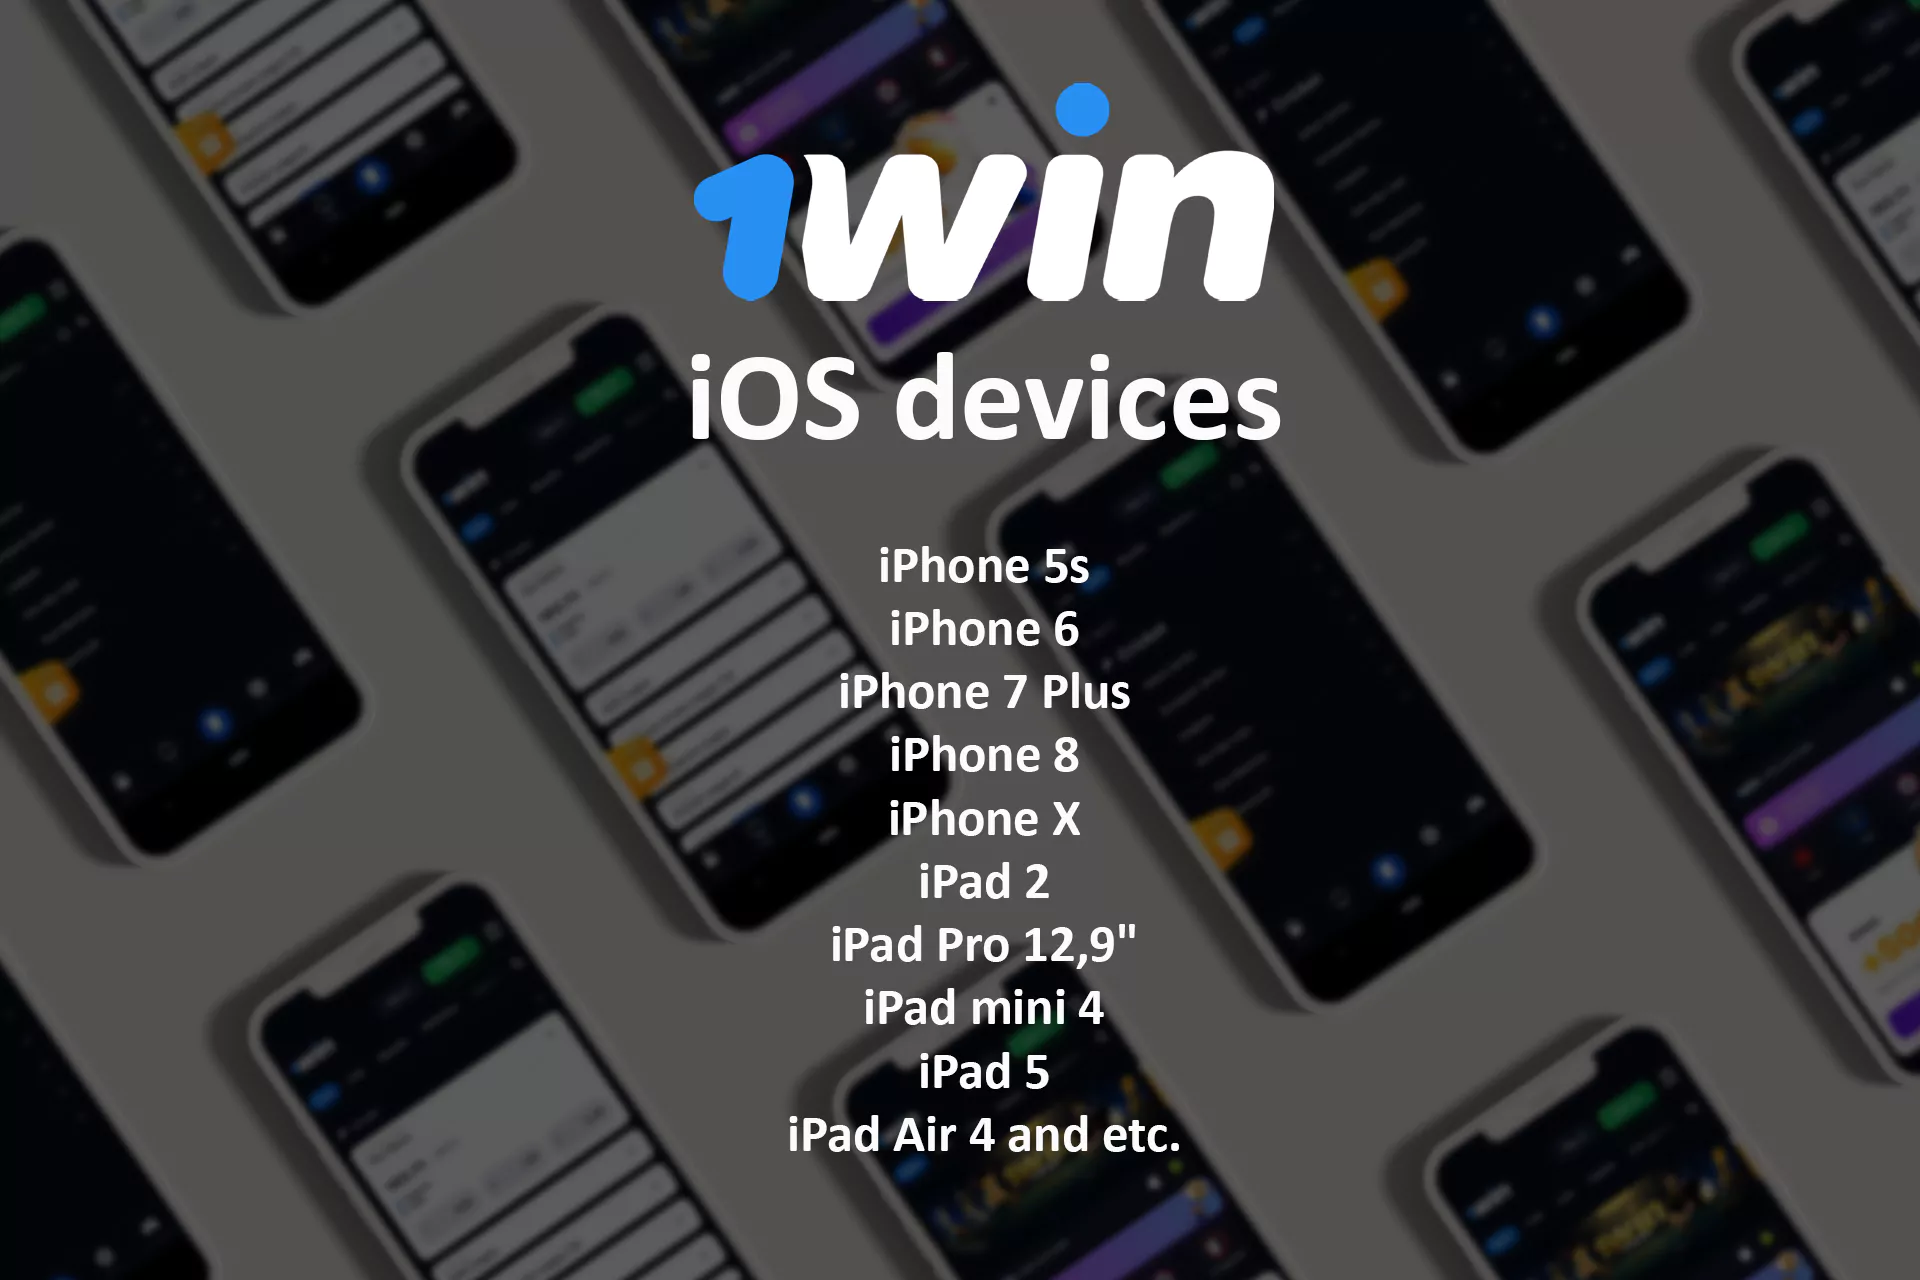 Here is a list of the devices on iOS that support the 1Win app.